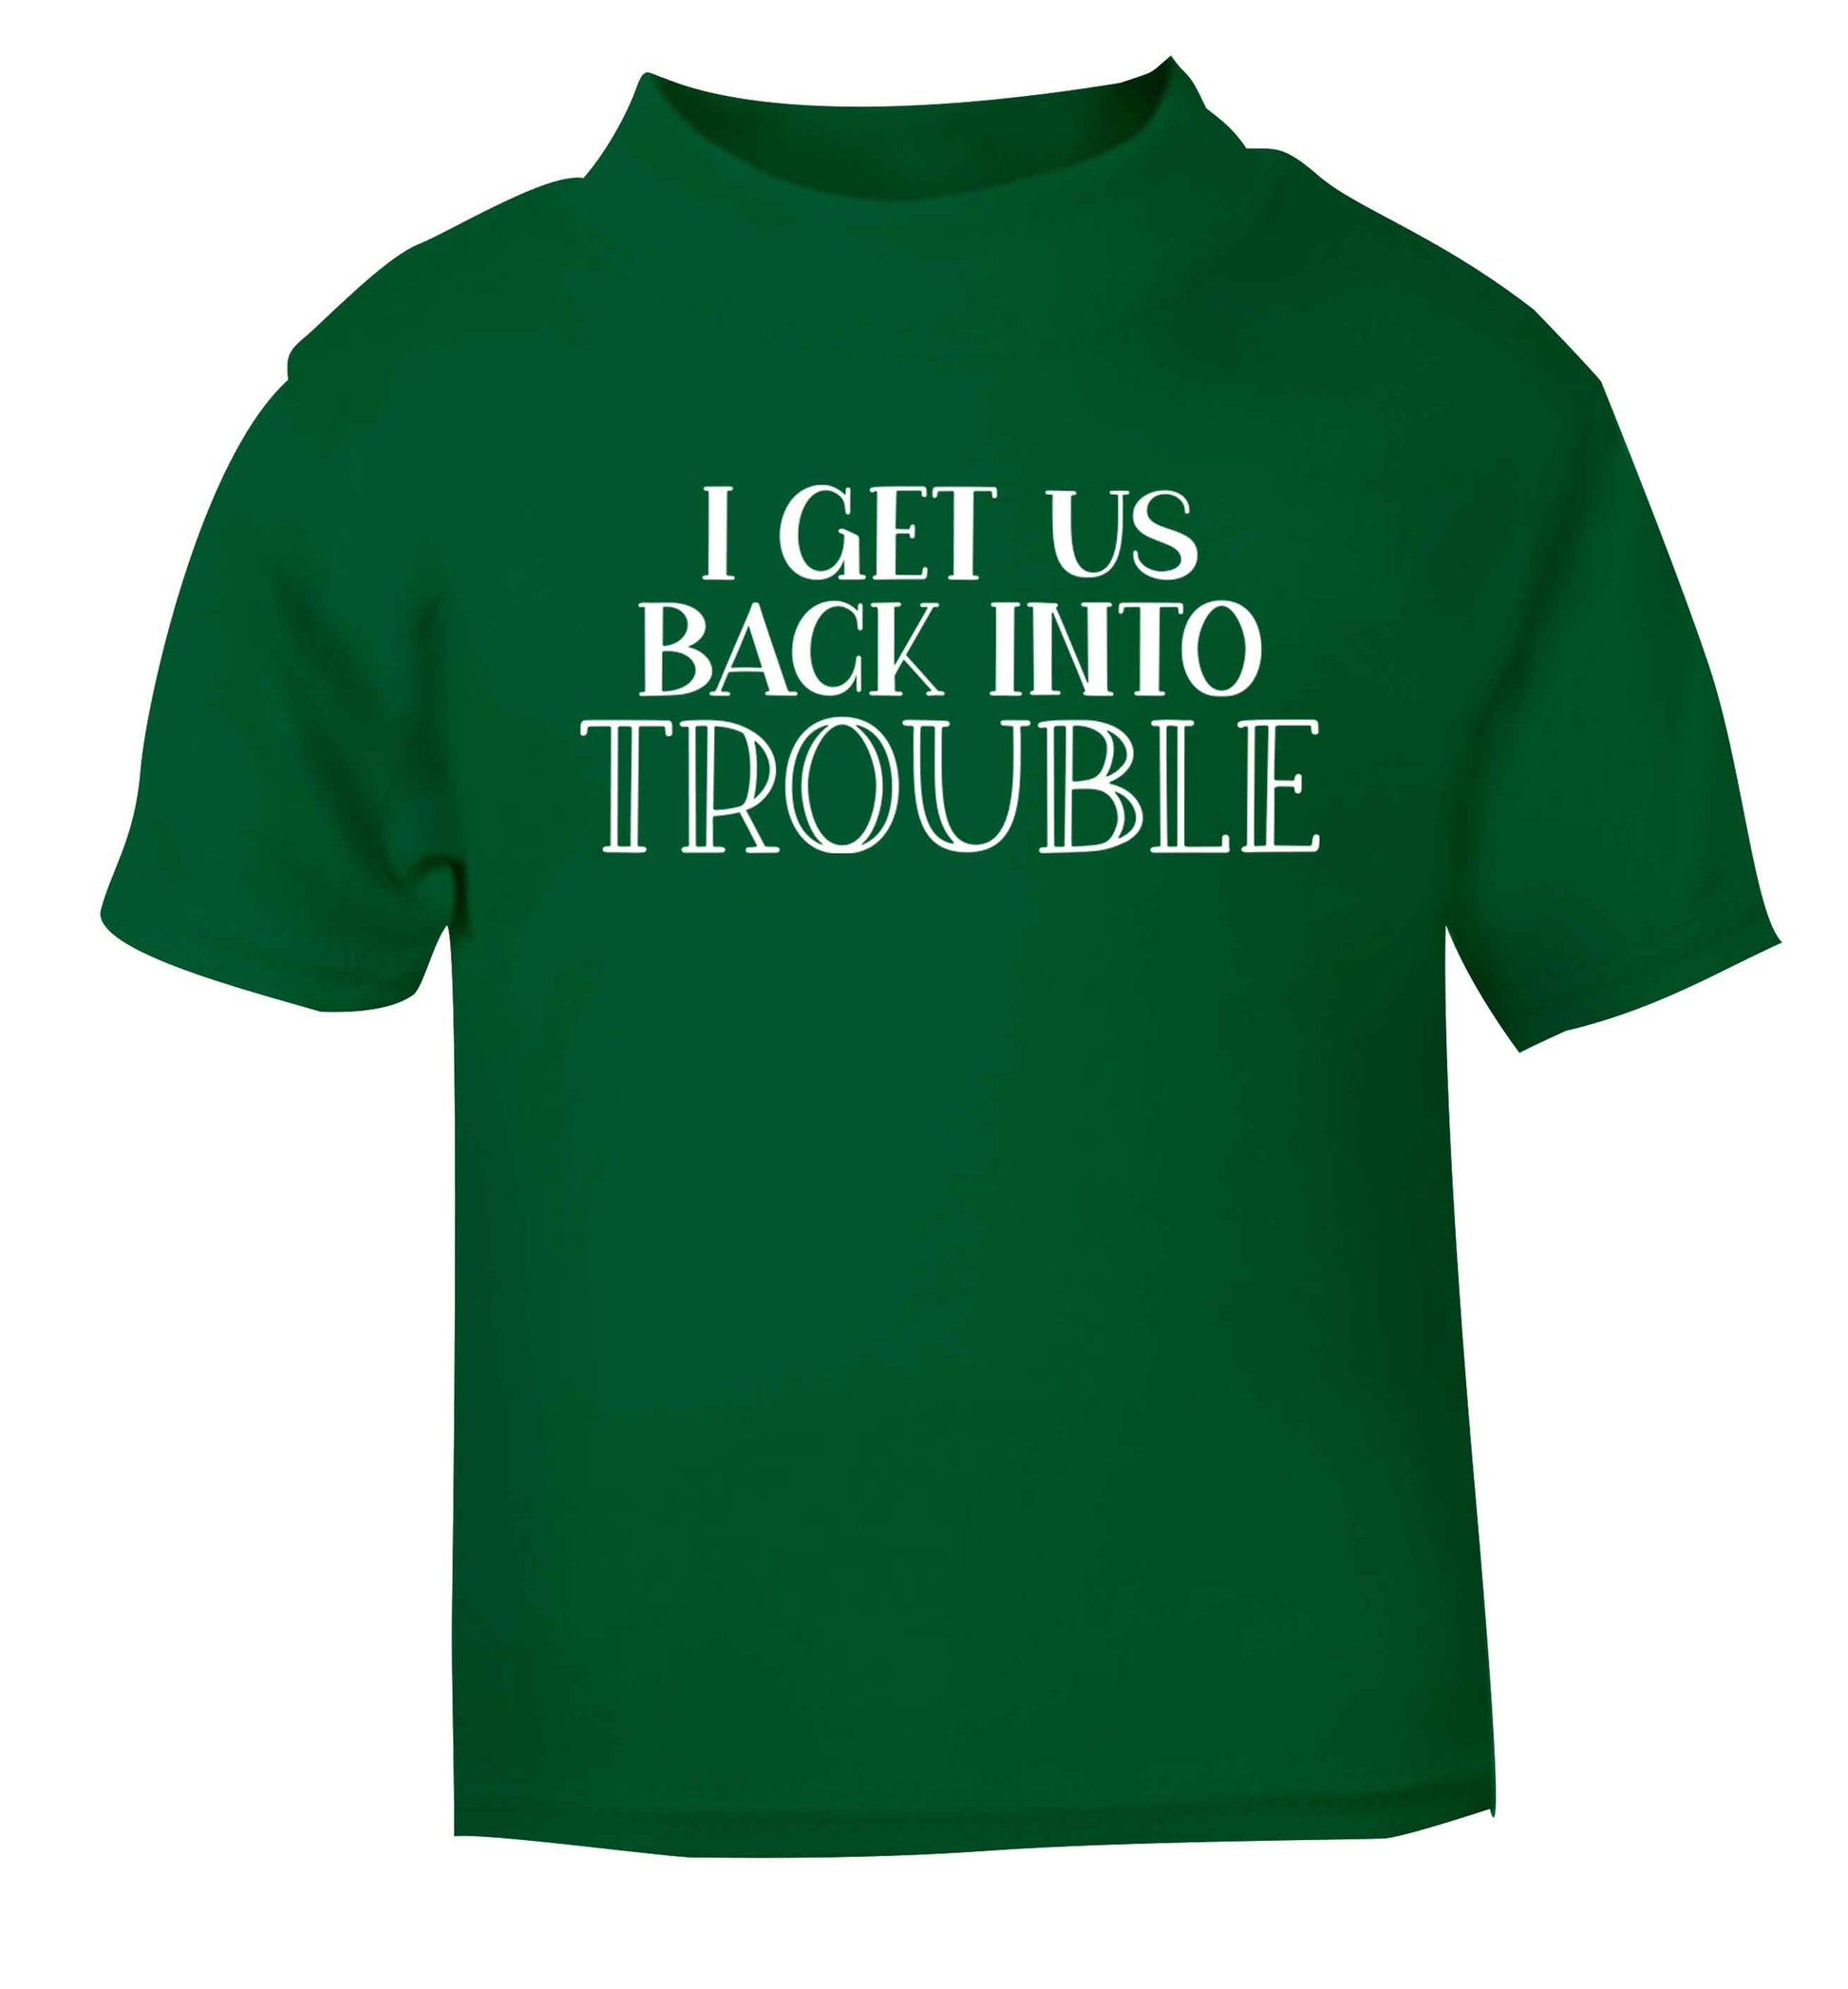 I get us back into trouble green baby toddler Tshirt 2 Years